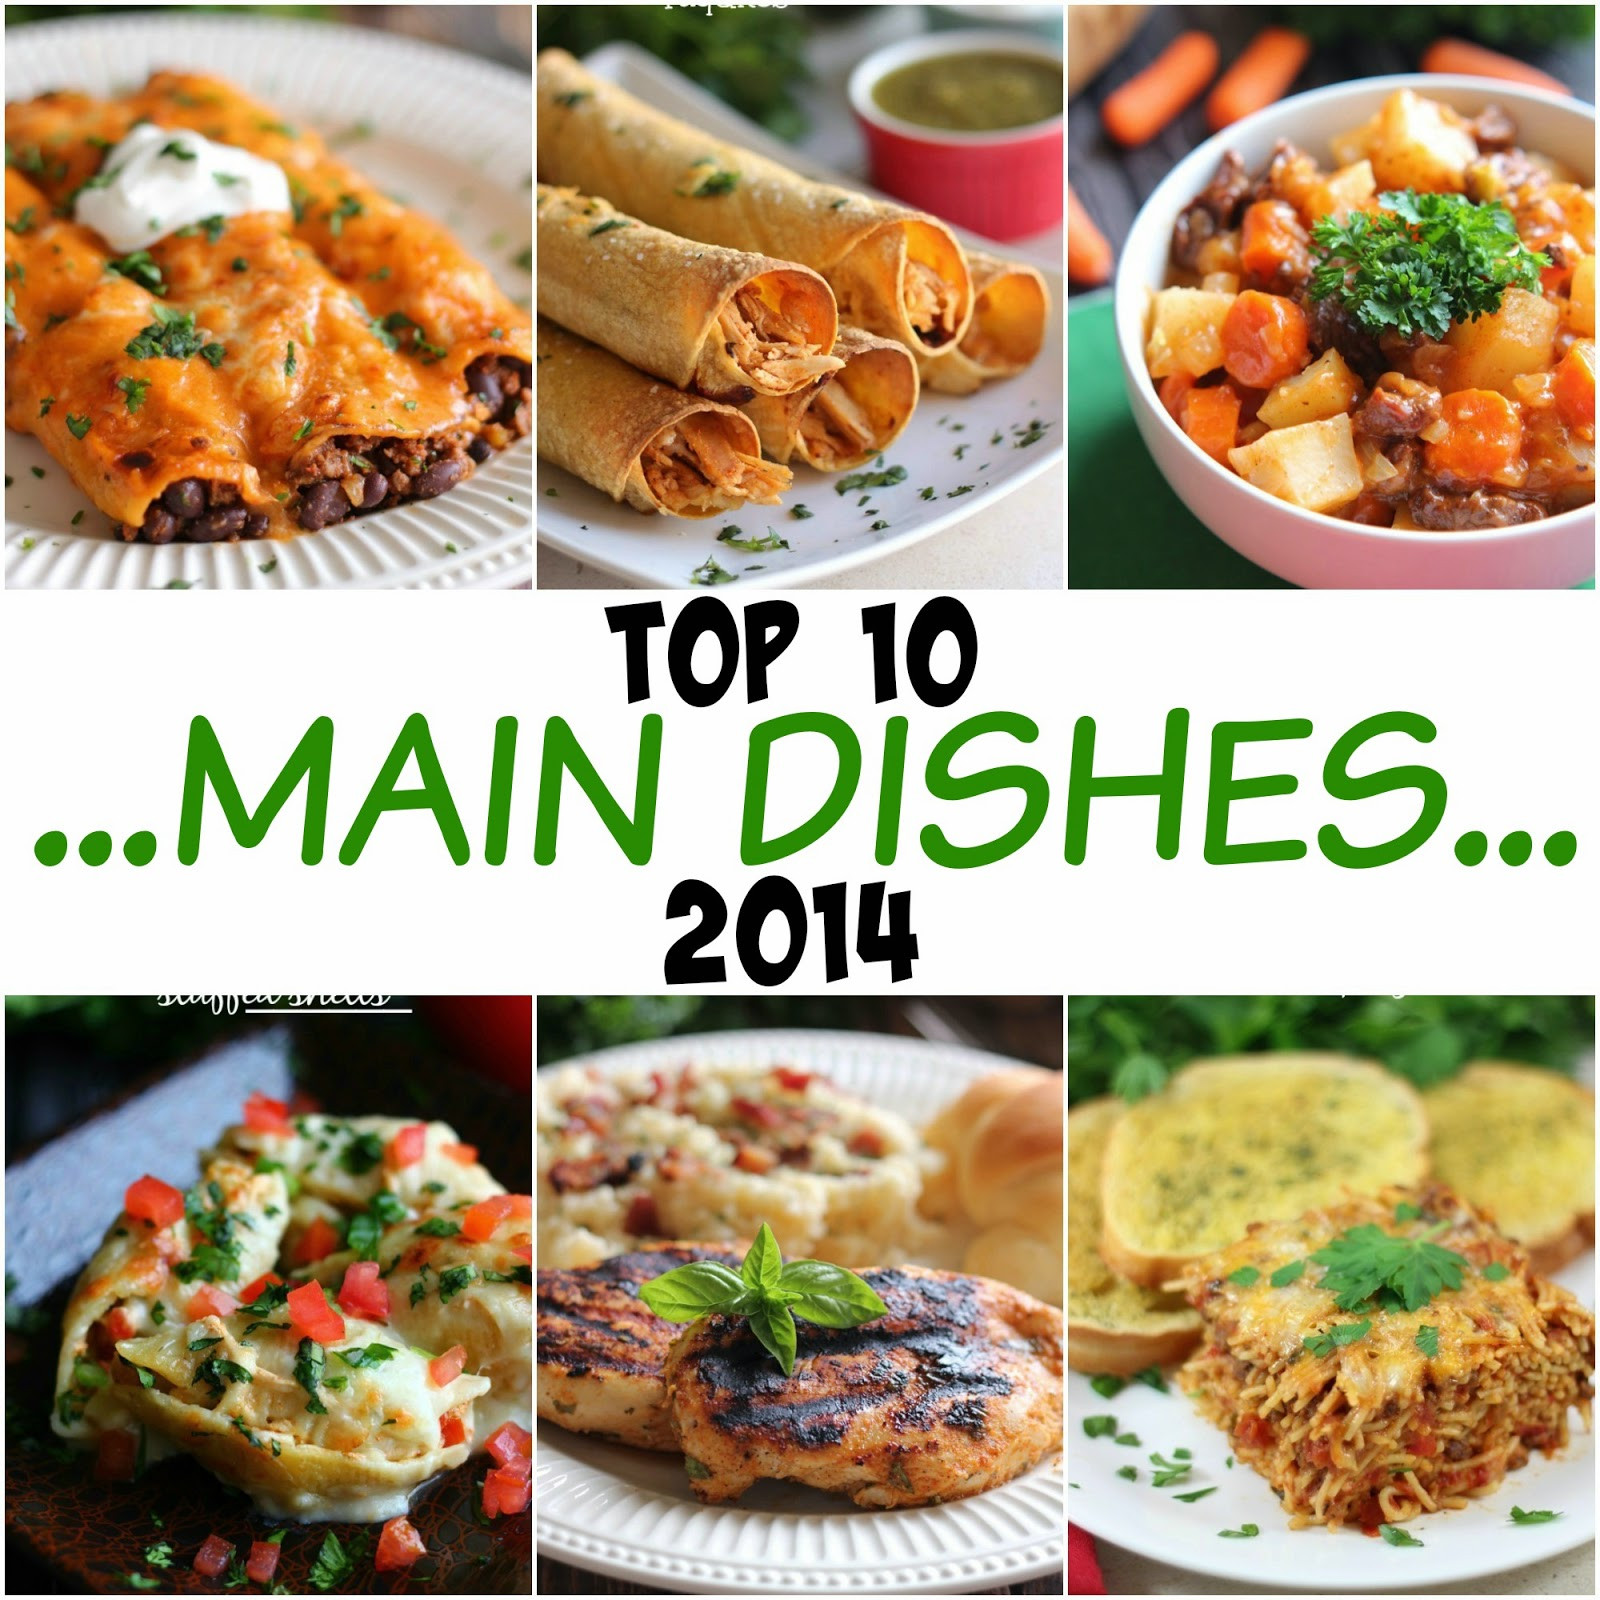 Main Dishes For Dinner
 Eat Cake For Dinner My Top 10 Main Dishes of 2014